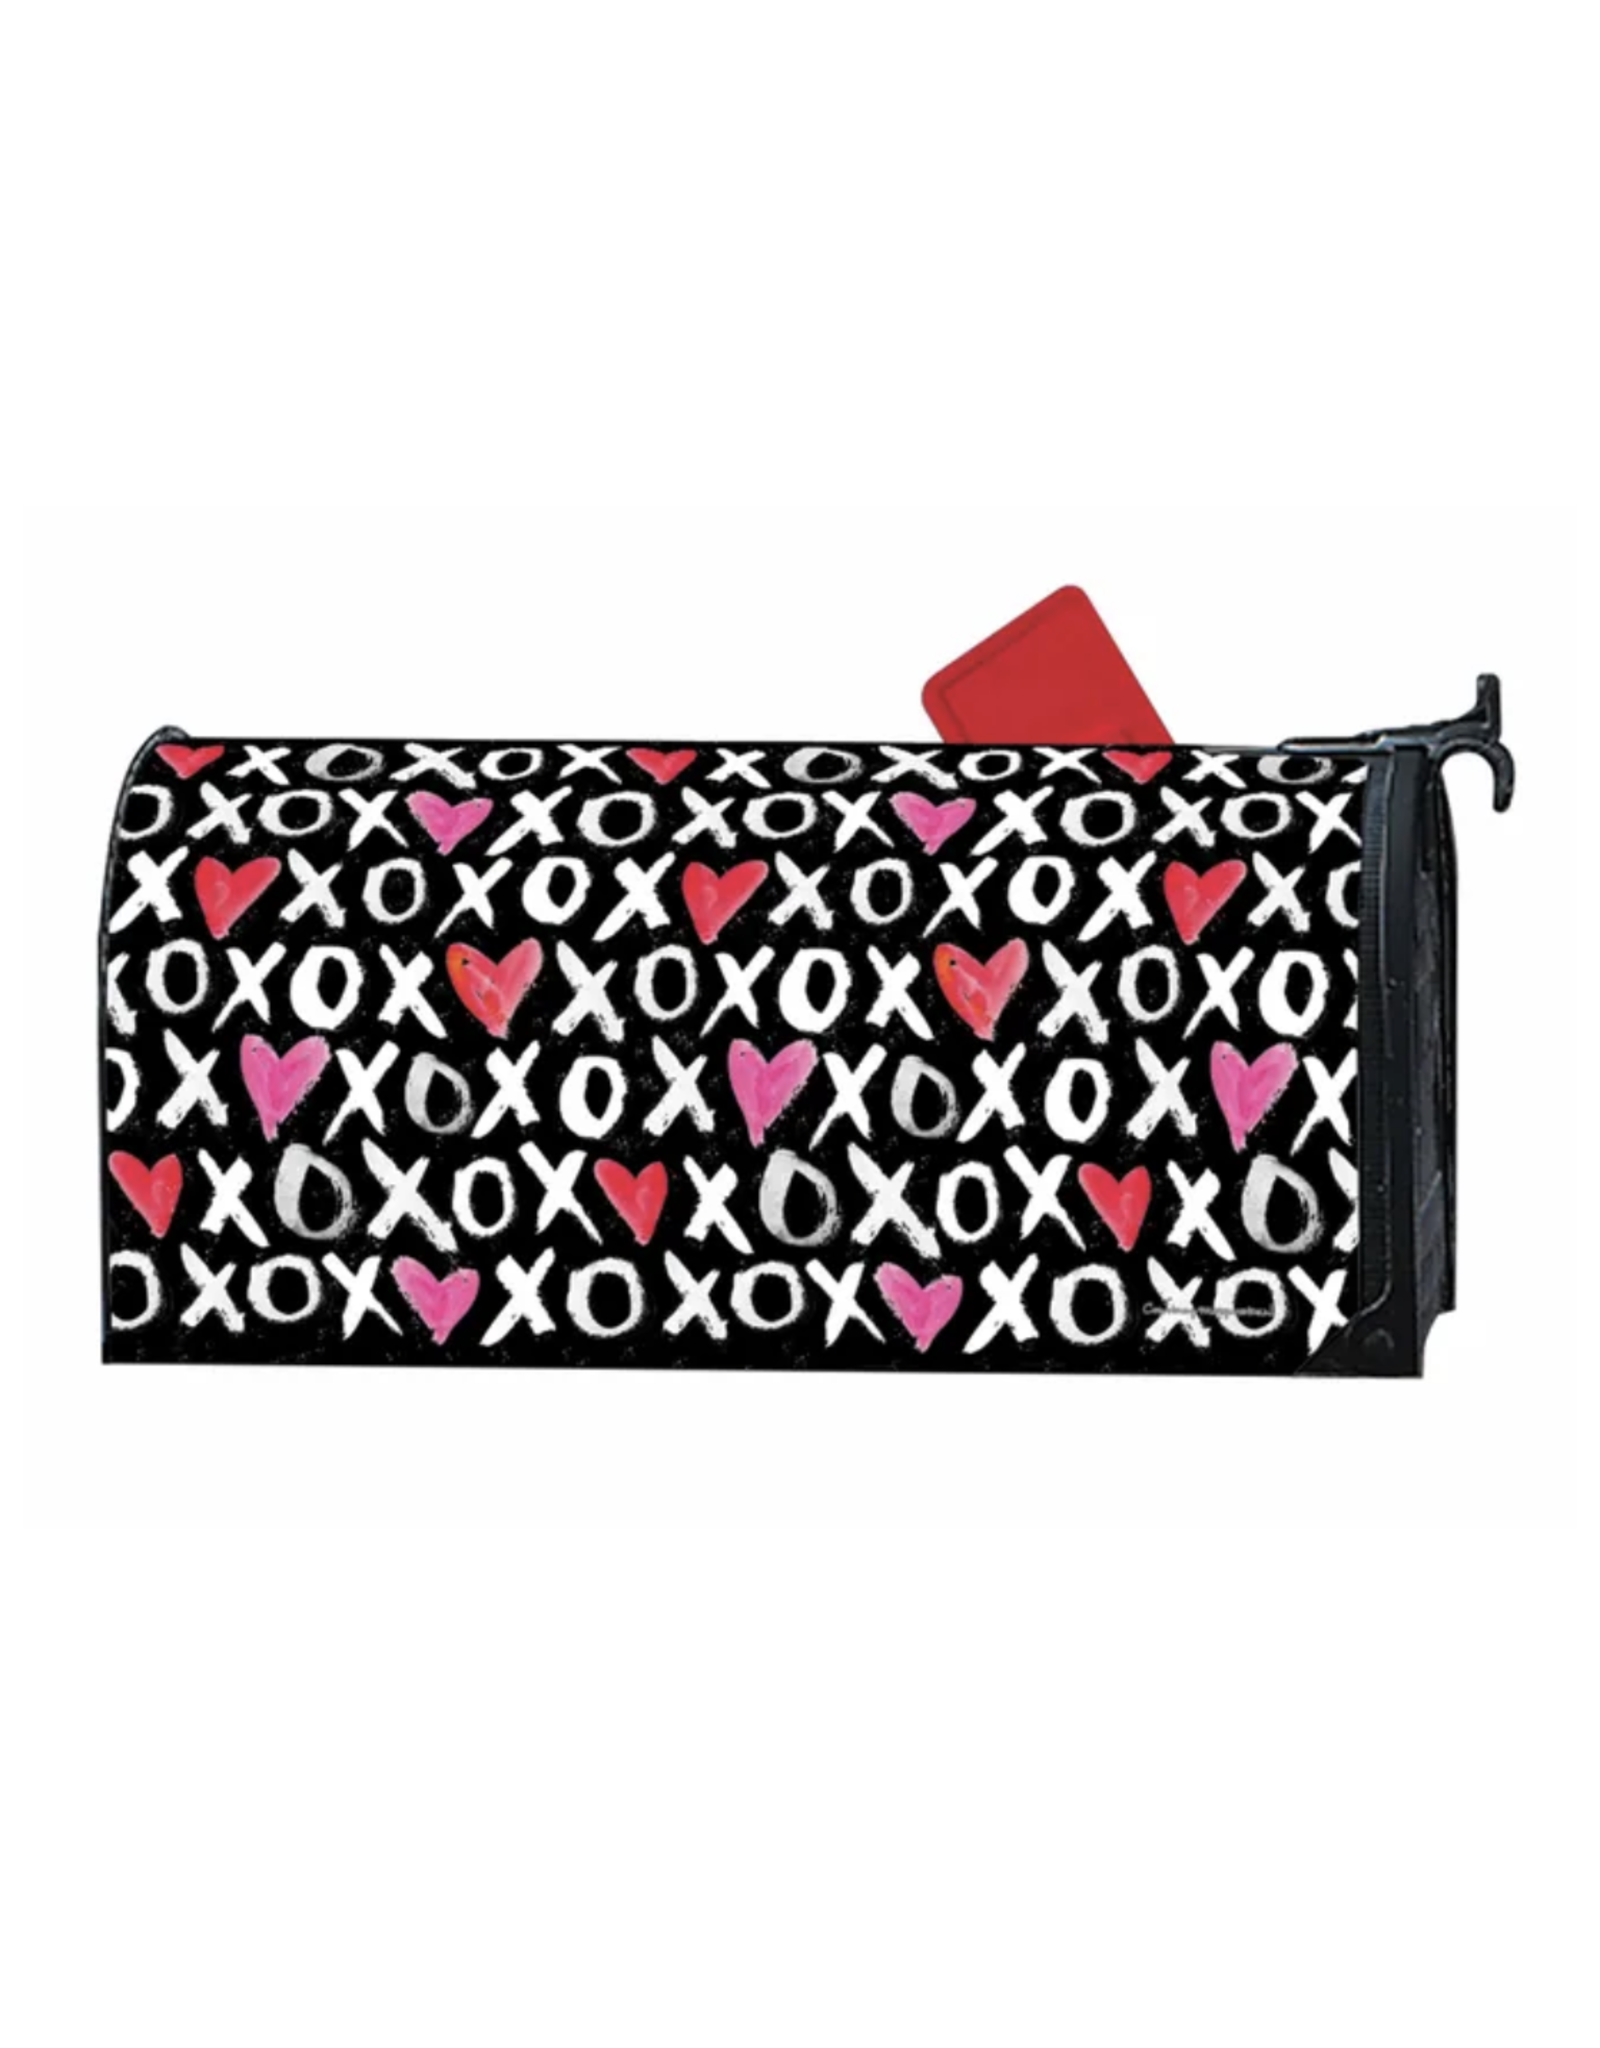 Studio M Hearts Hugs and Kisses Mailbox Cover